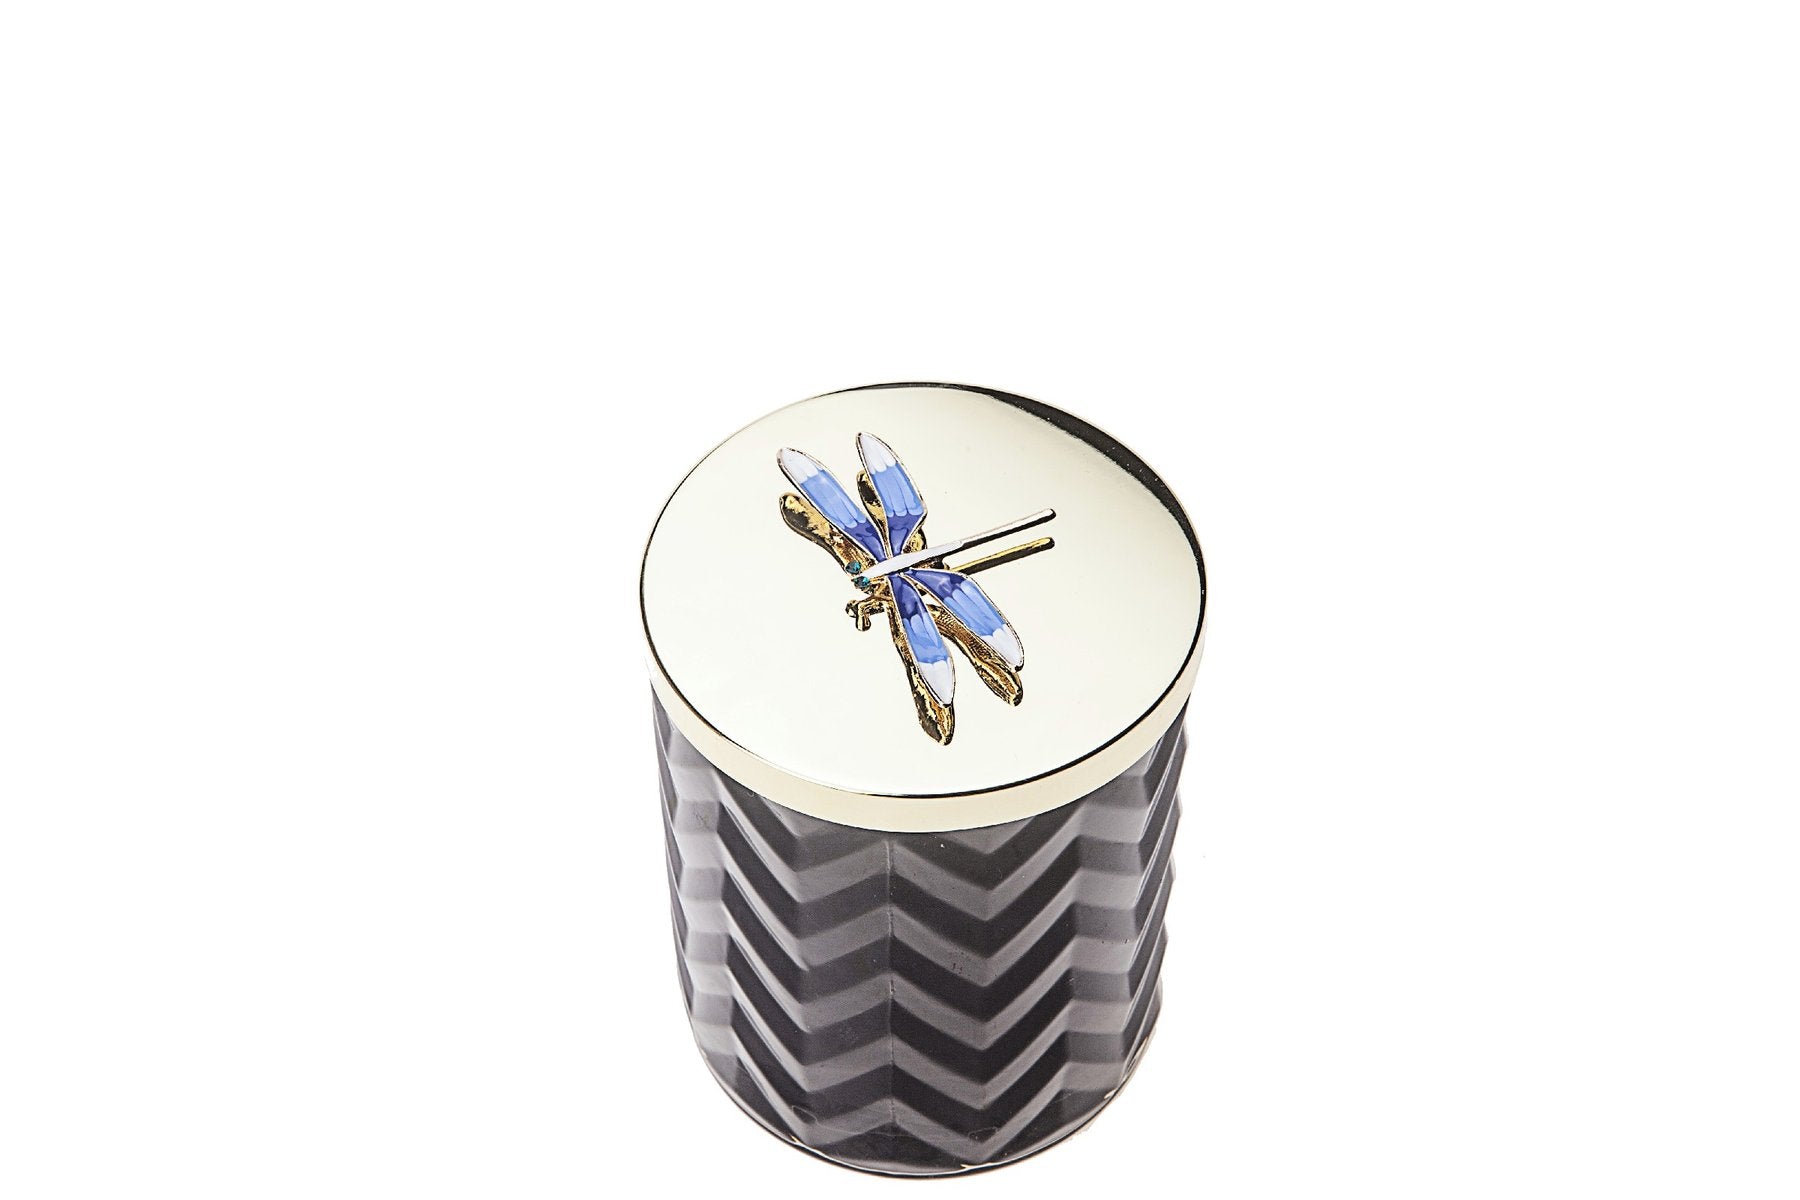 COTE NOIRE Herringbone Candle with Scarf - Dragonfly Lid